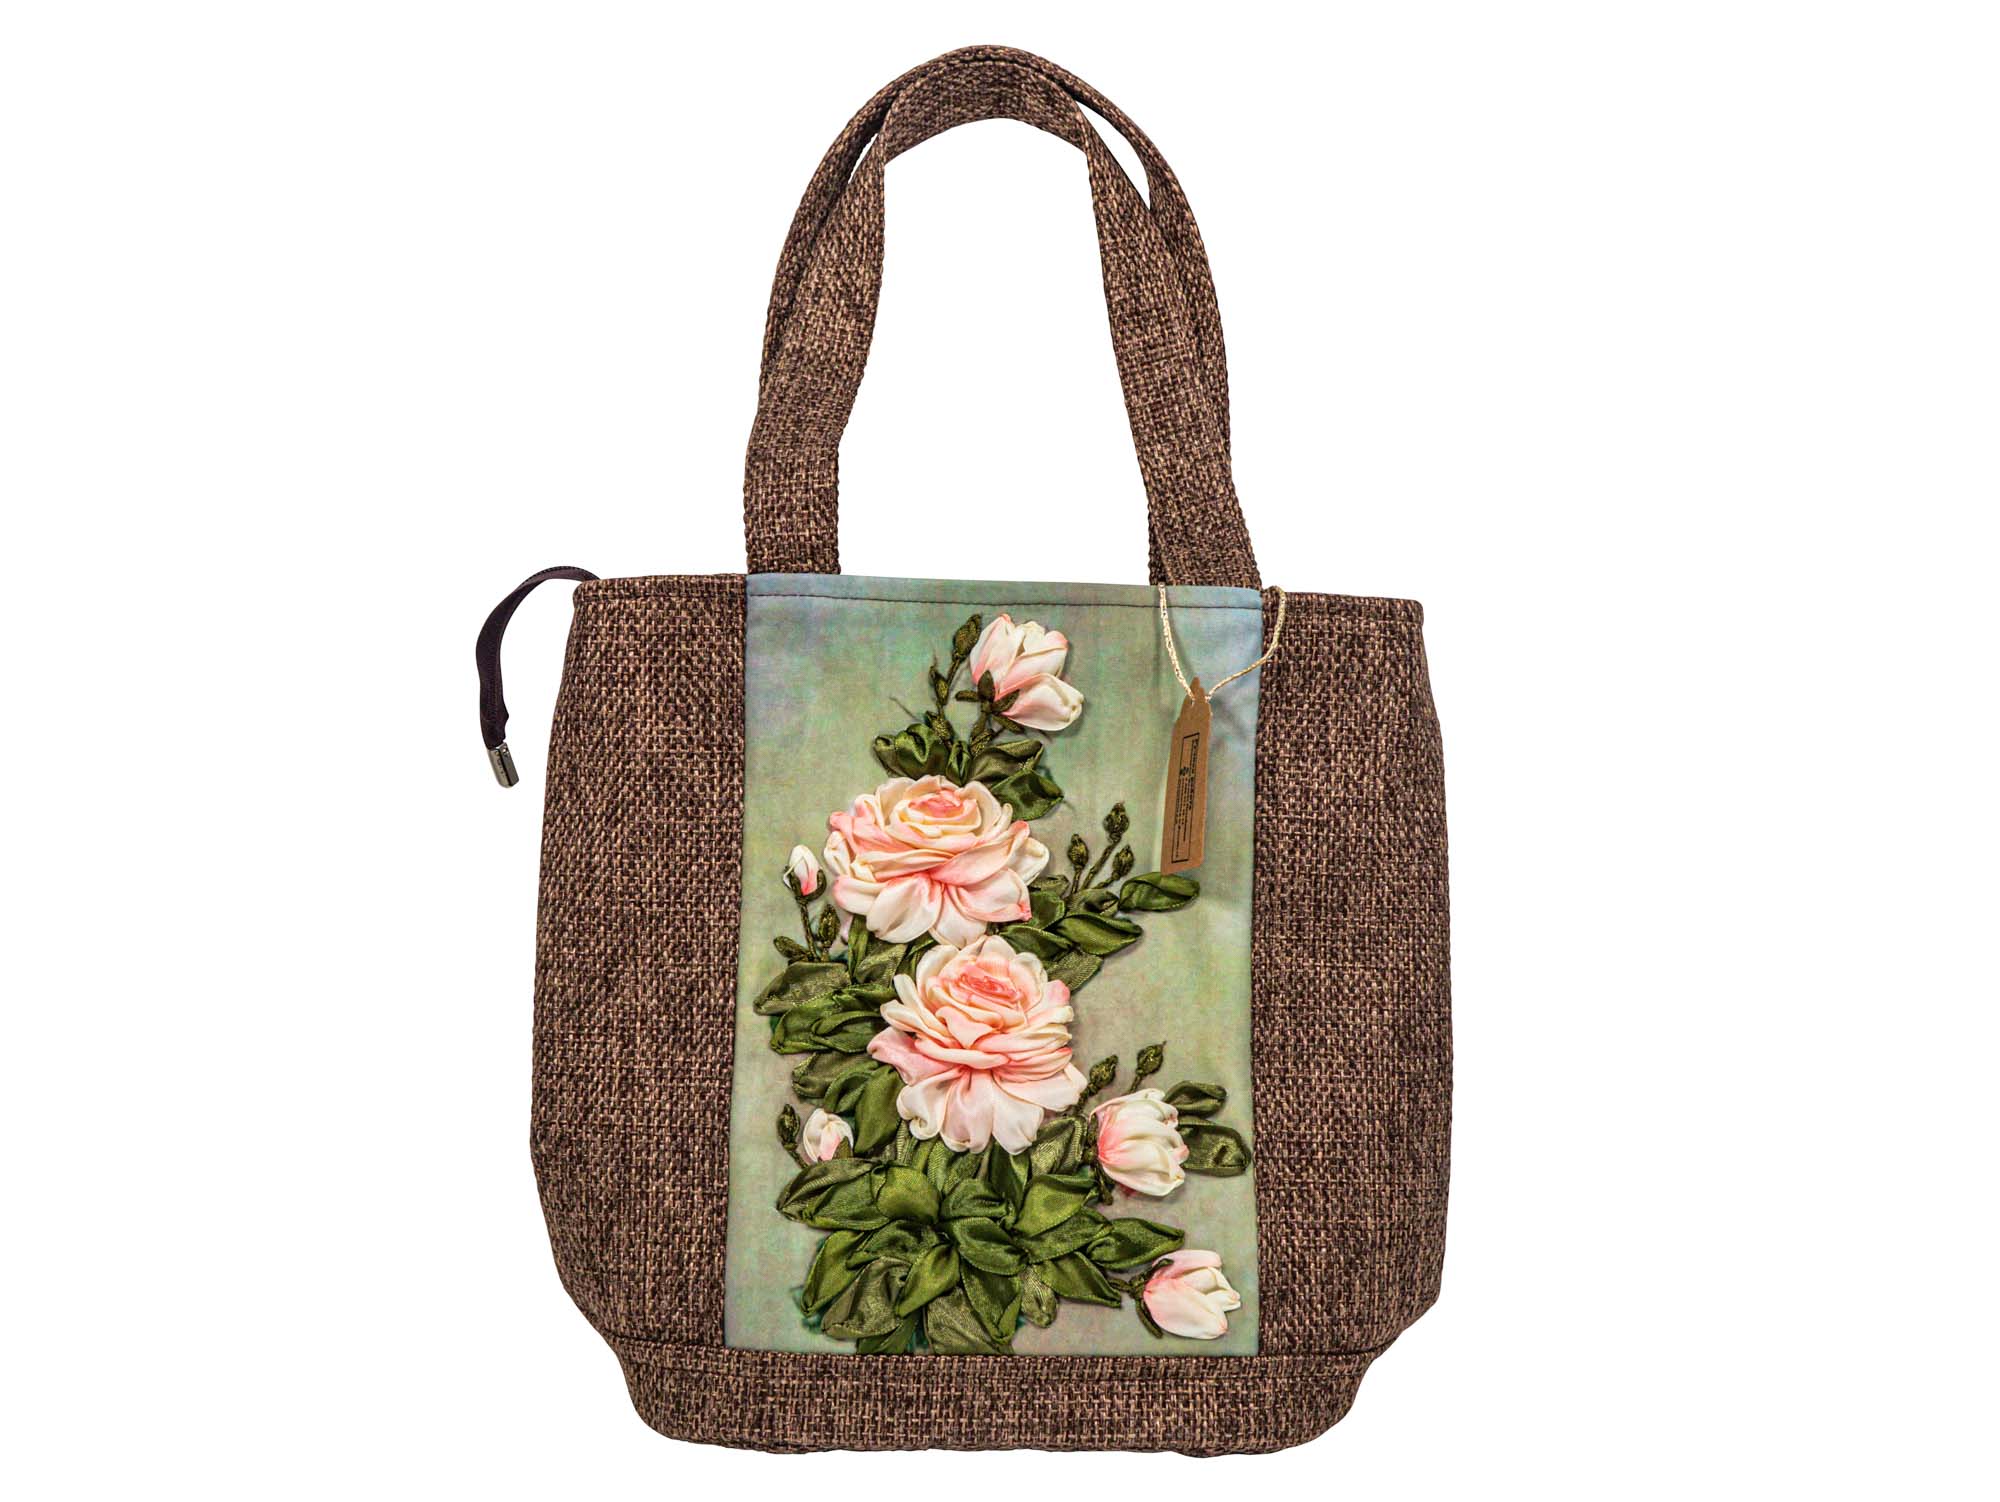 Hand Embroidered Burlap Tote Bag: Gallery Item - 1379-30-G4969 (9UL8)